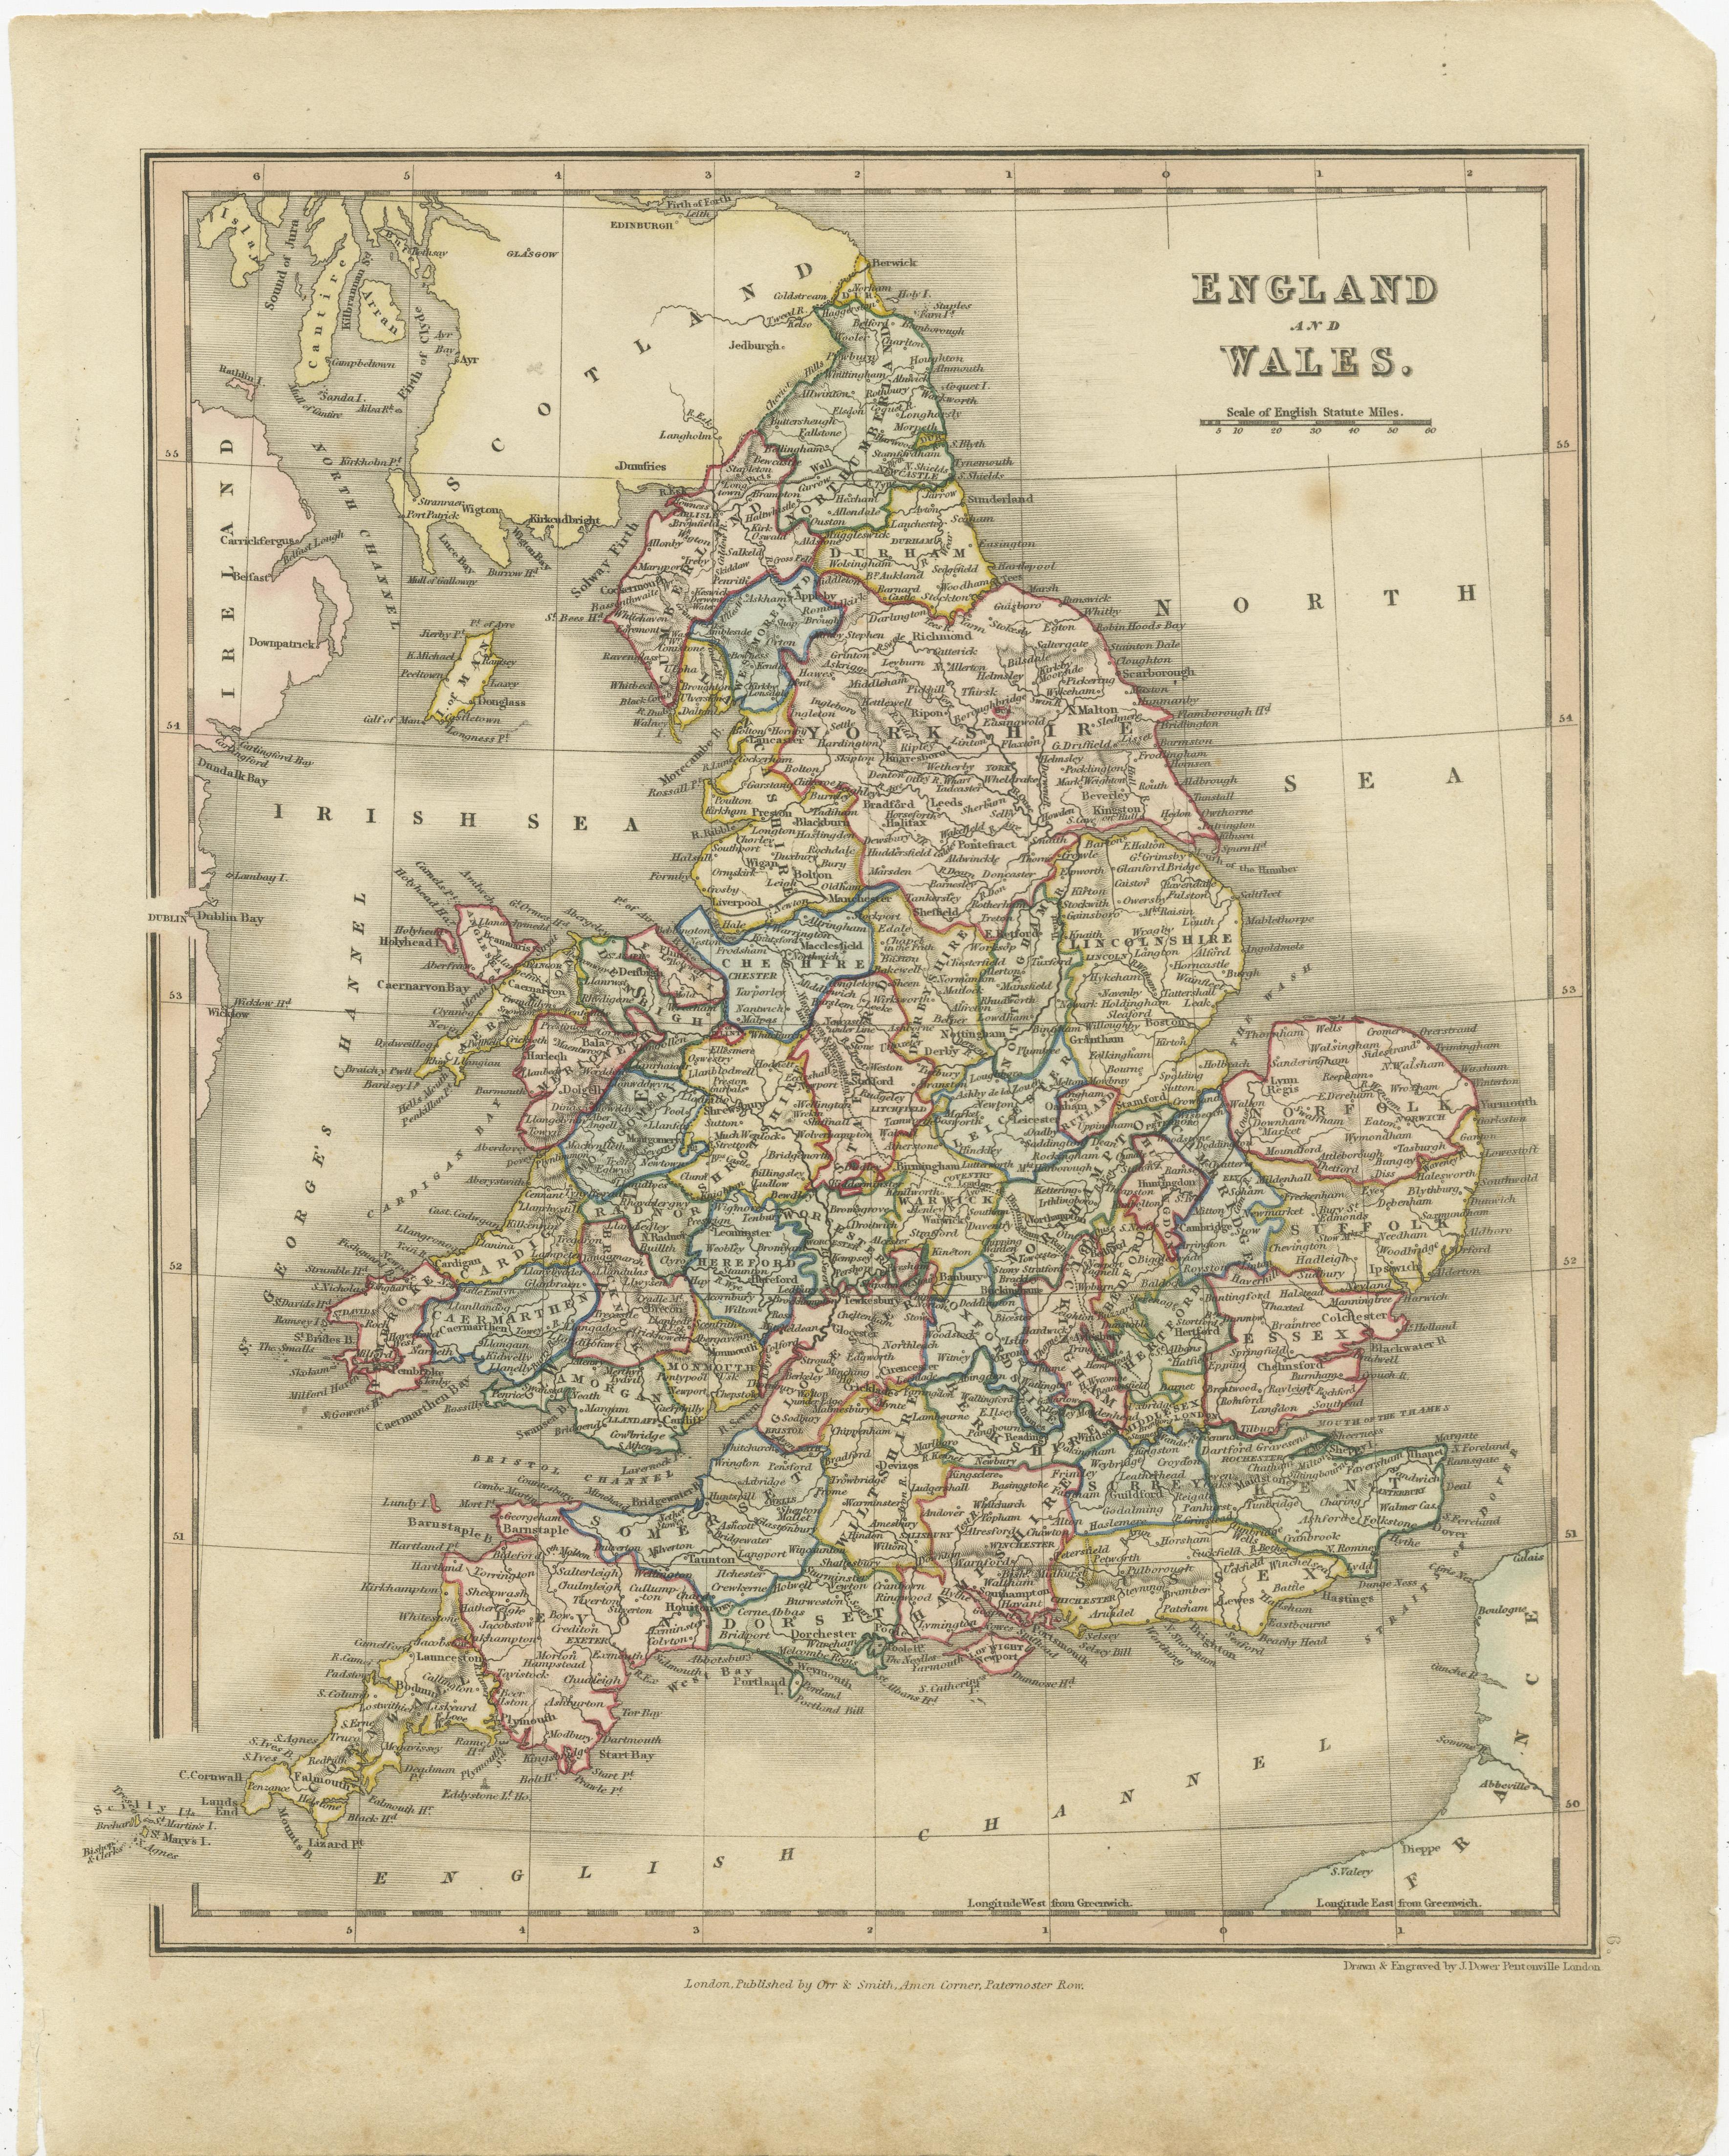 Antique map titled 'England and Wales'. Original antique map of England and Wales. Drawn and engraved by J. Dower. Originates from 'A General Descriptive Atlas Of The Earth, Containing Separate Maps Of The Various Countries And States (..)'.